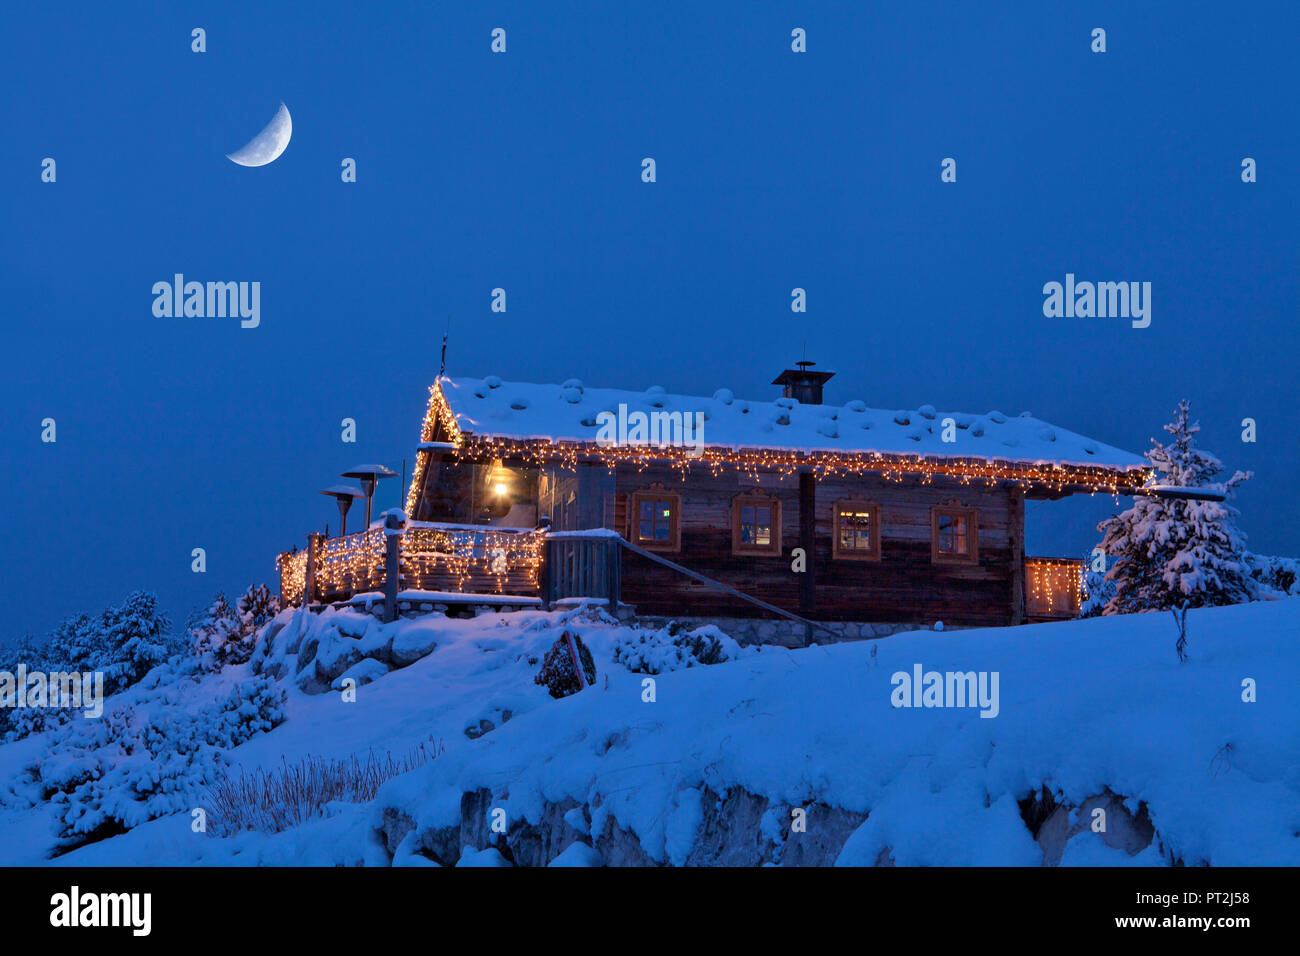 Austria, Tyrol, Mieming, Christmas in the mountains Stock Photo